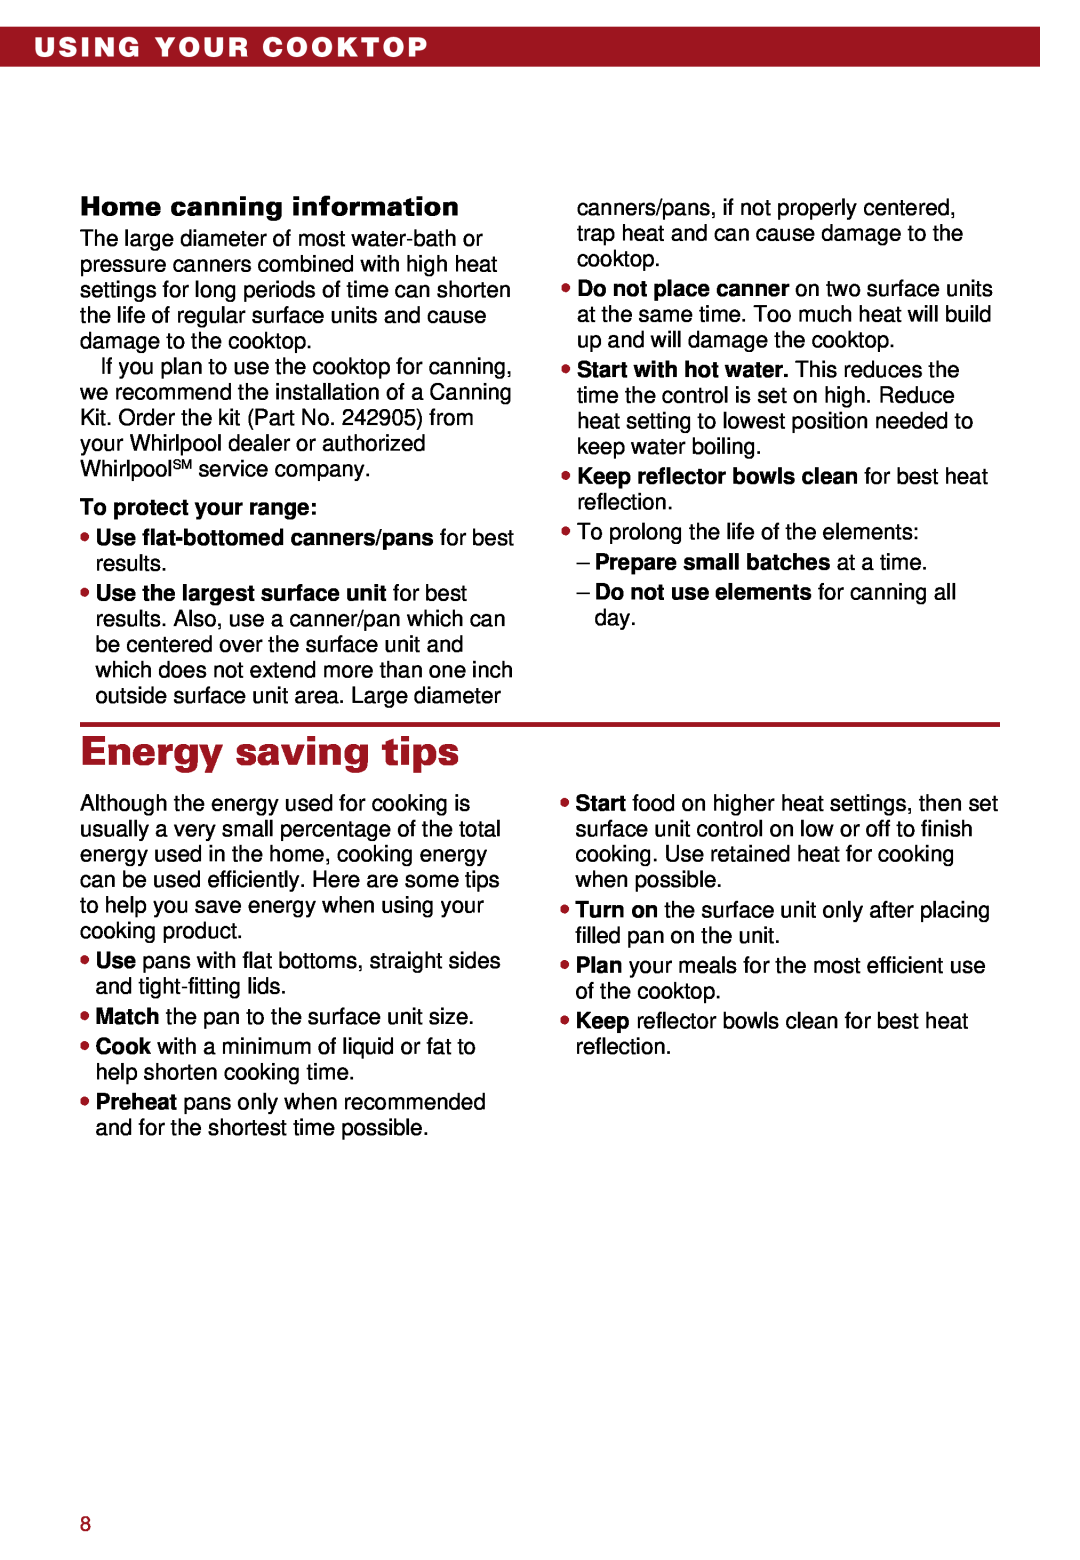 Whirlpool RC8110XA, RC8100XA important safety instructions Energy saving tips, Using Your Cooktop, Home canning information 